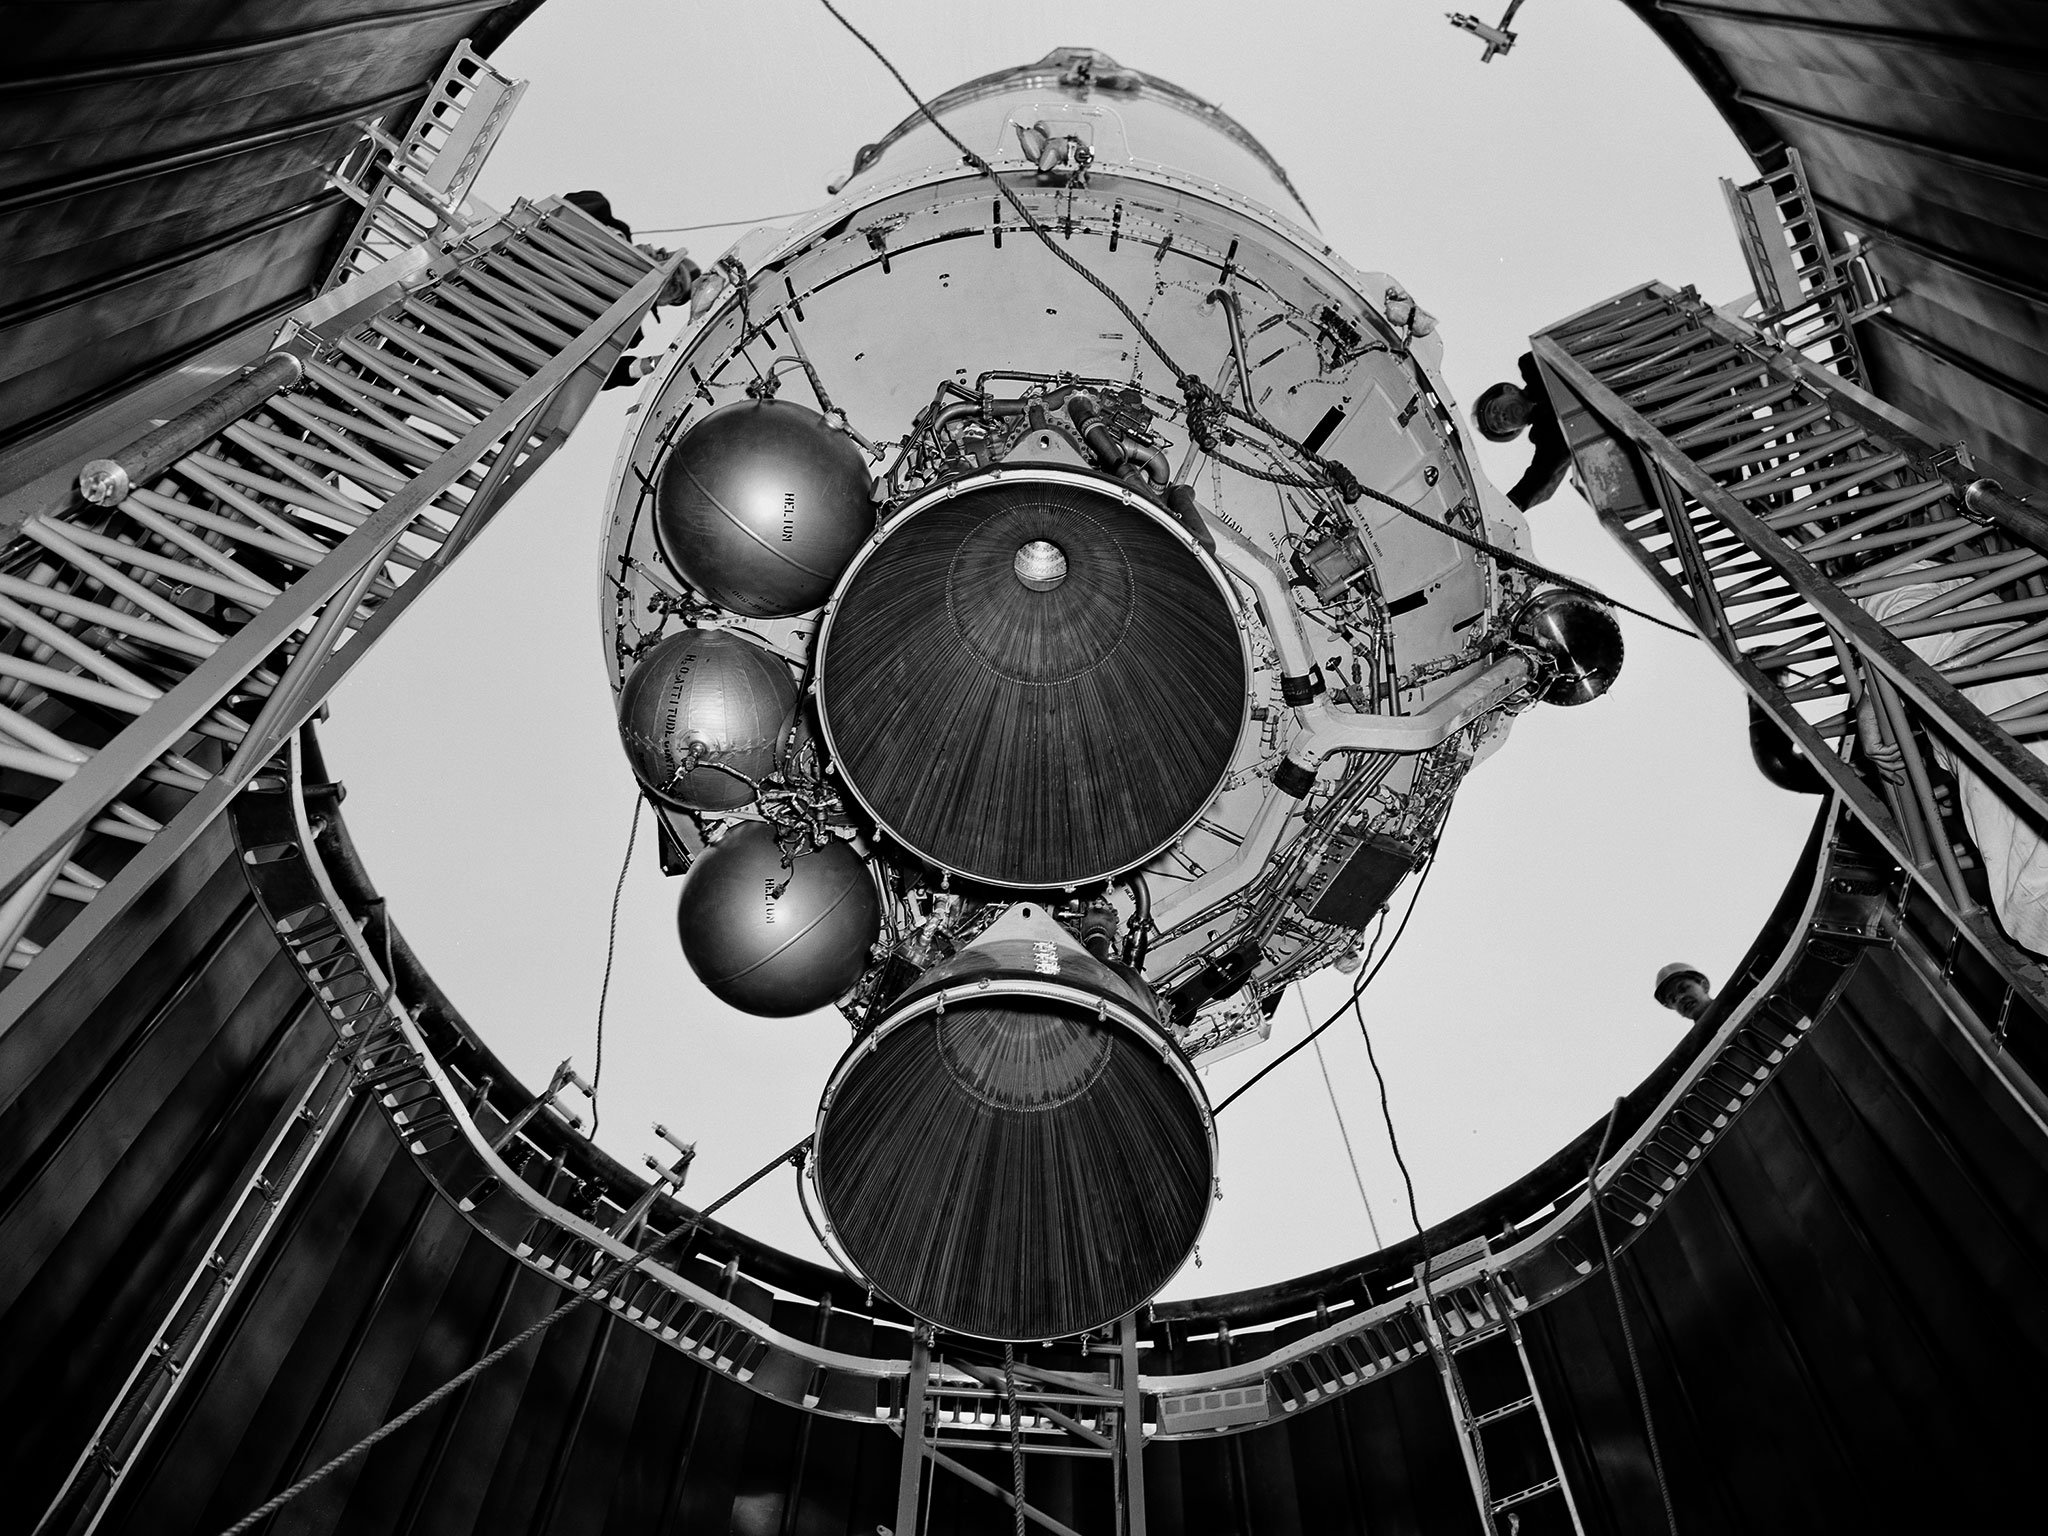 A Centaur upper stage is tested in the 1960s at NASA's Lewis Research Center. Photo by NASA